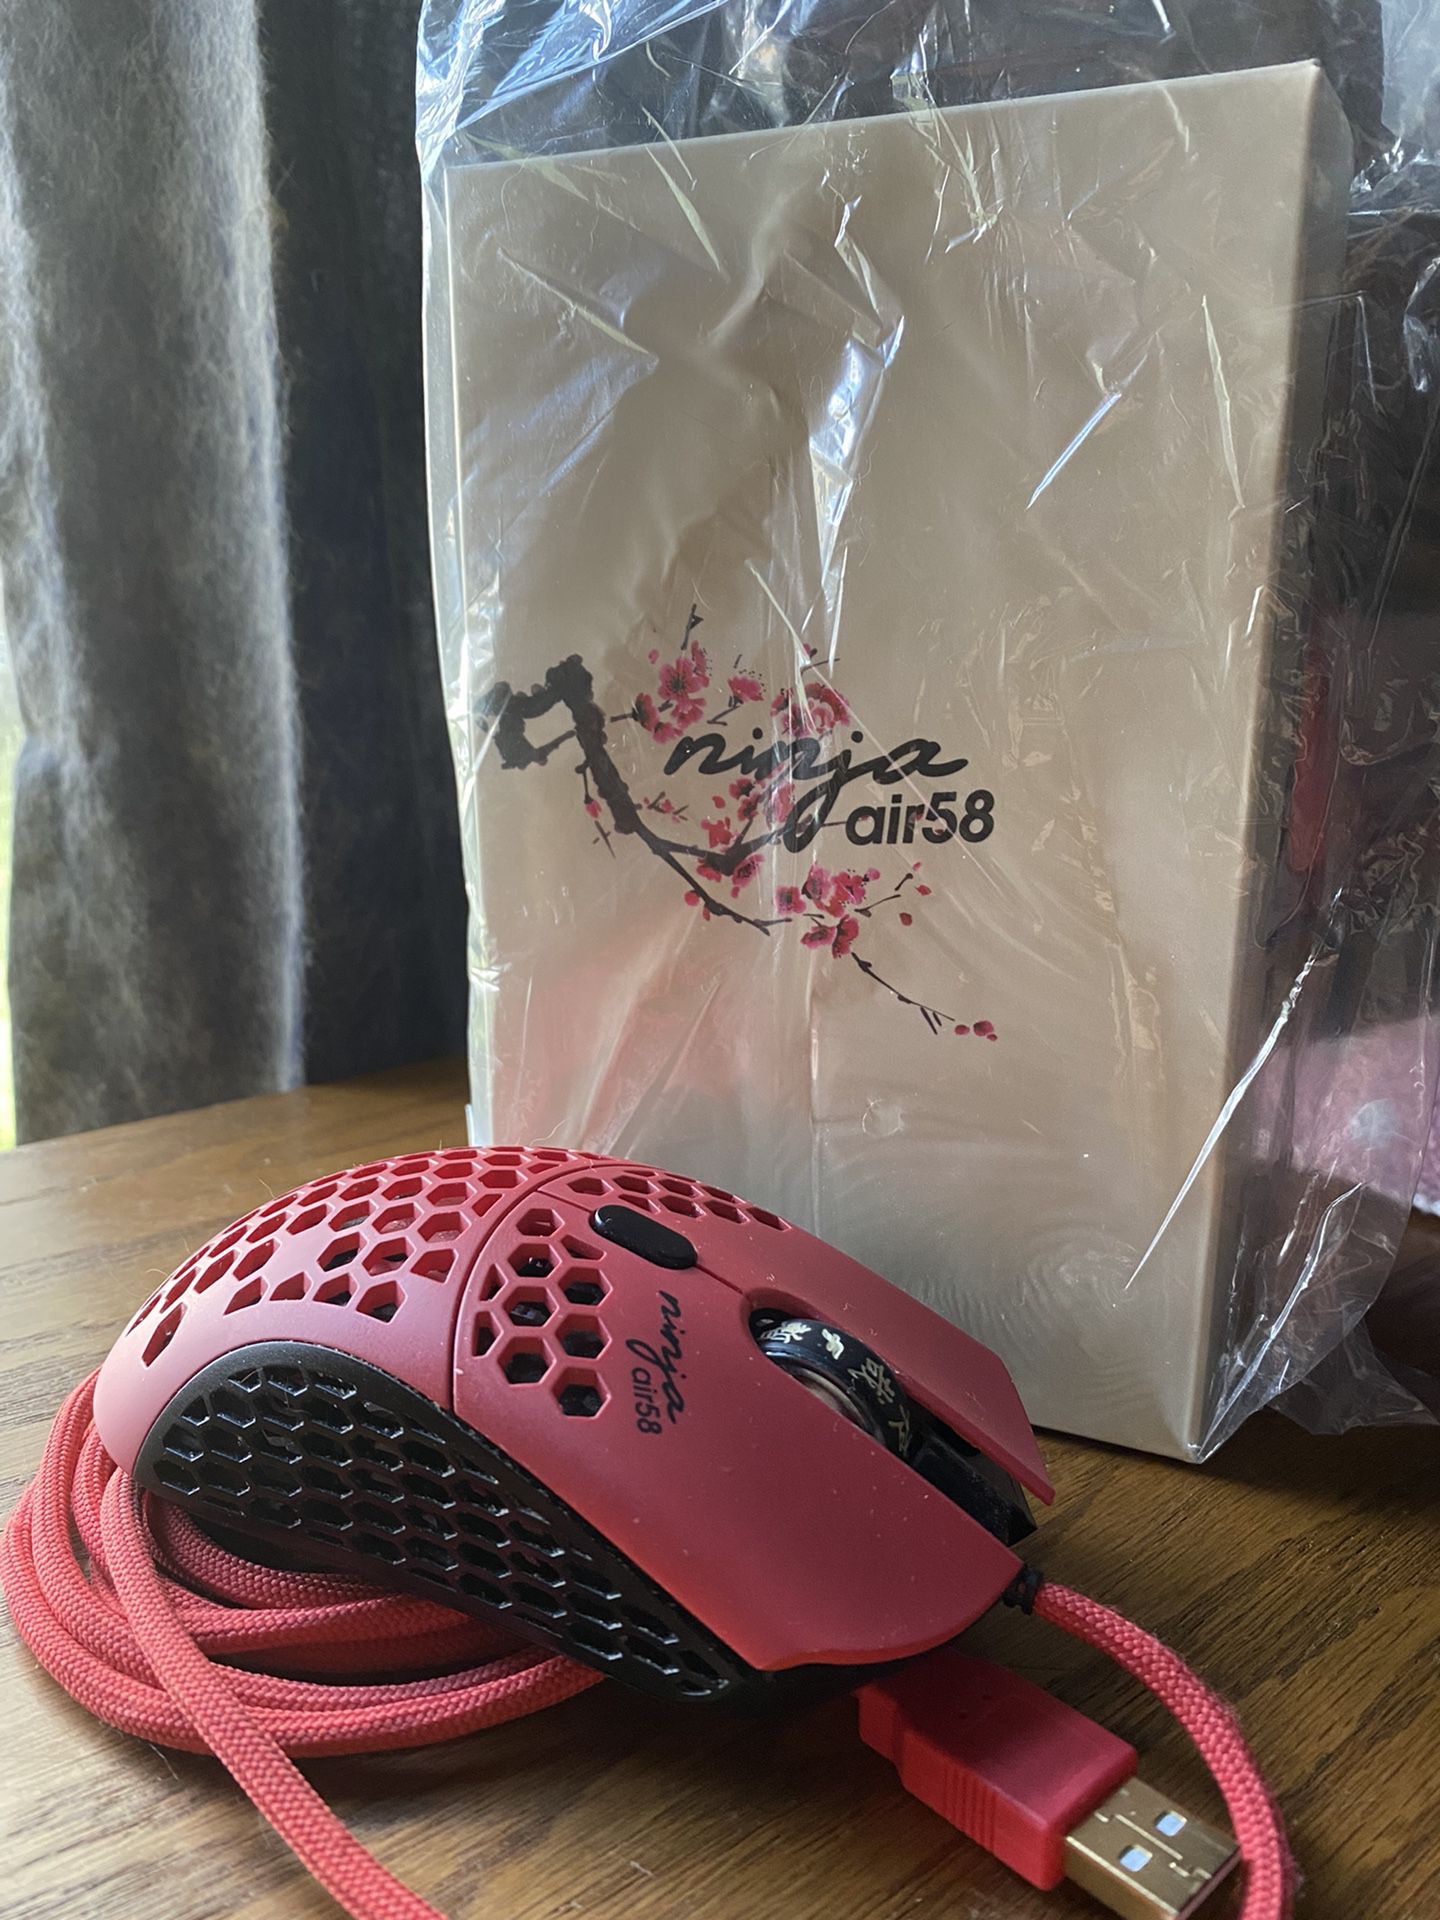 Finalmouse air58 Ninja Cherry Blossom Red 